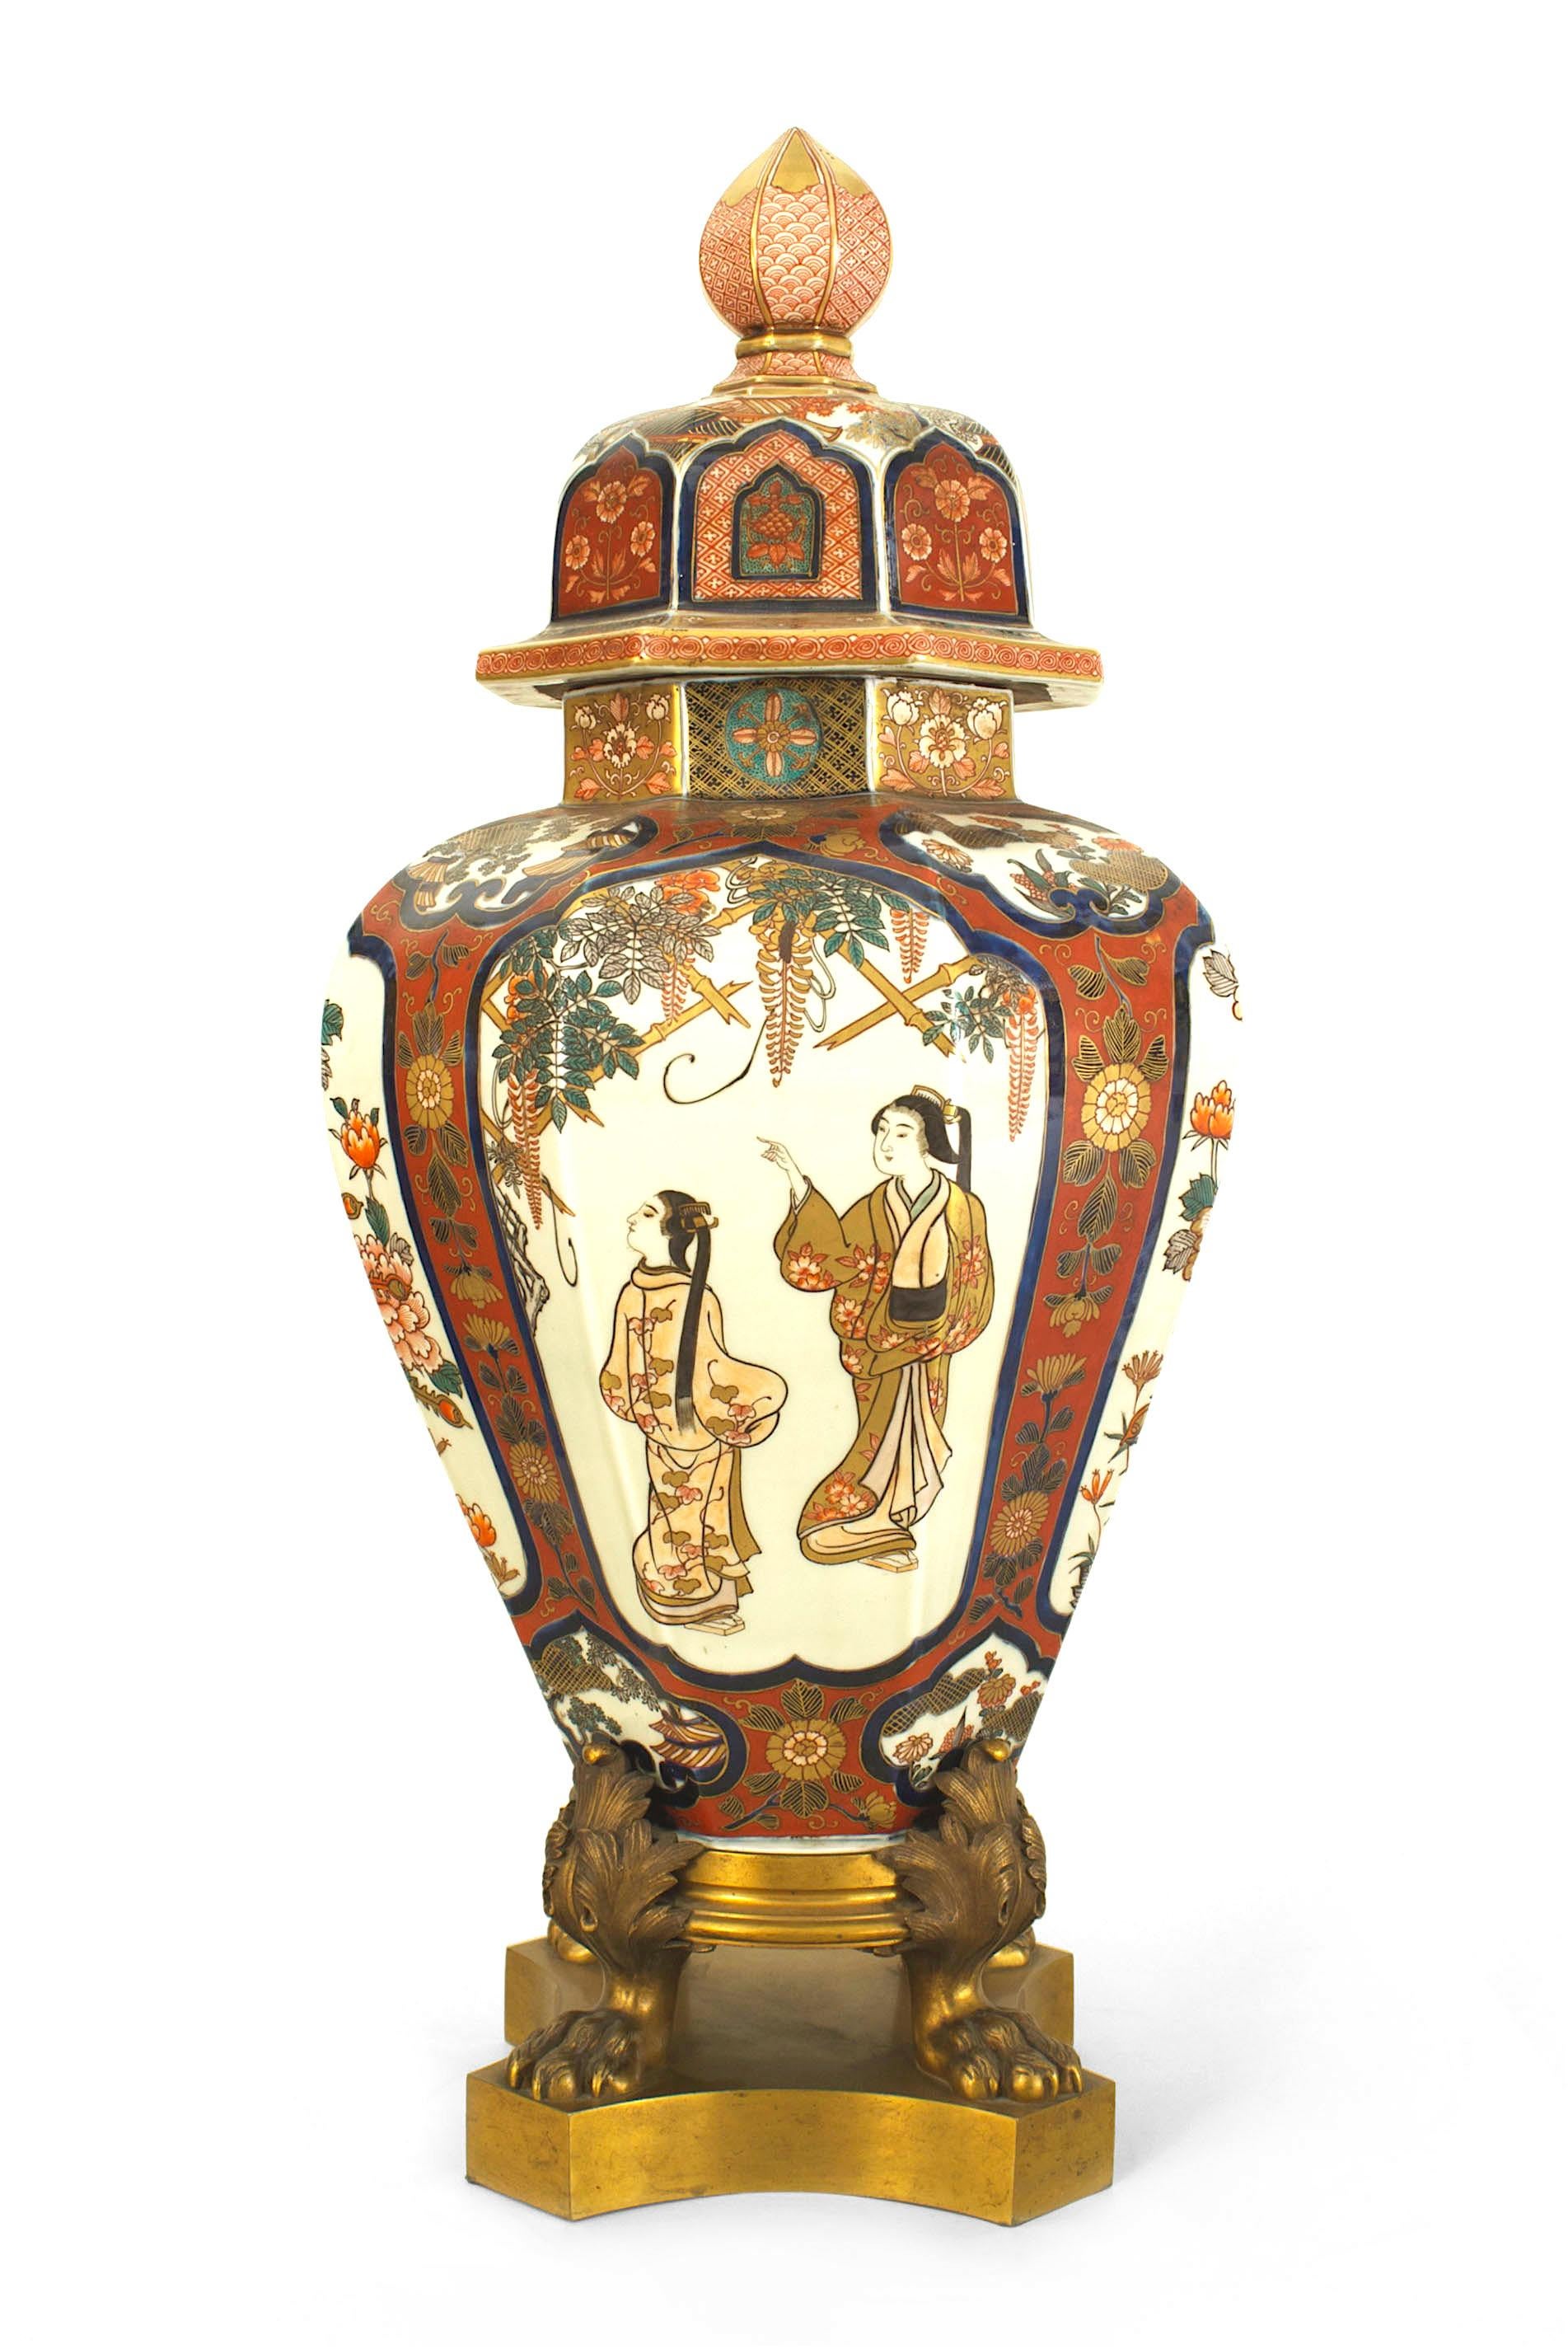 Large octagonal Imari porcelain vase with finial cover and 4 bronze doré claw feet on base (19th century).